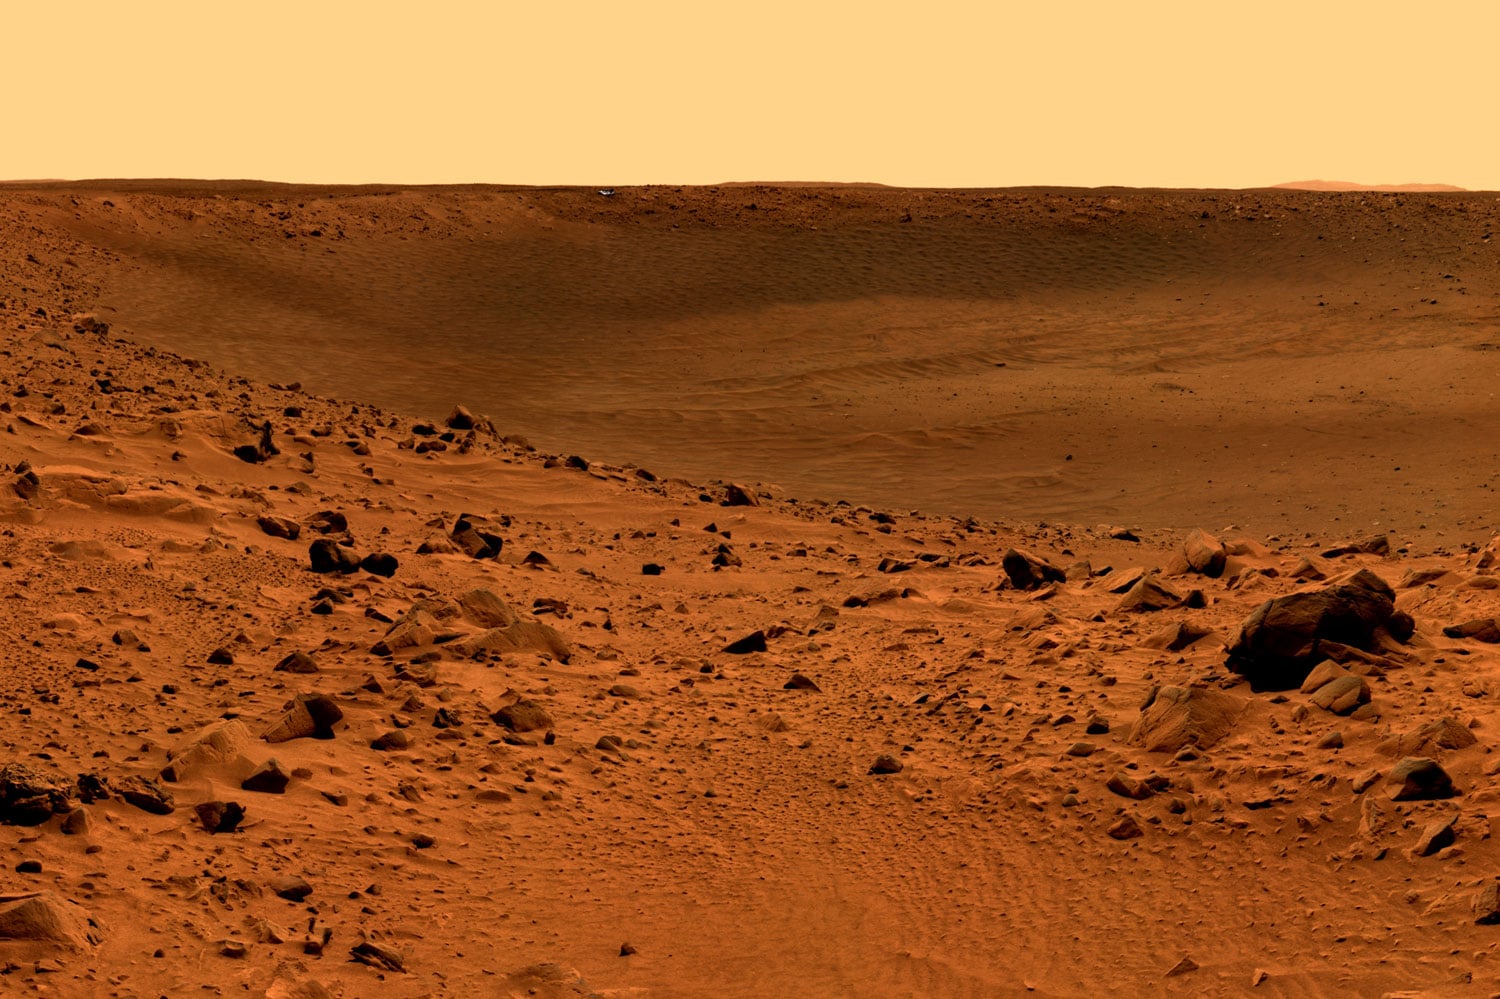 Organic molecules discovered on Mars might be consistent with early life on Mars